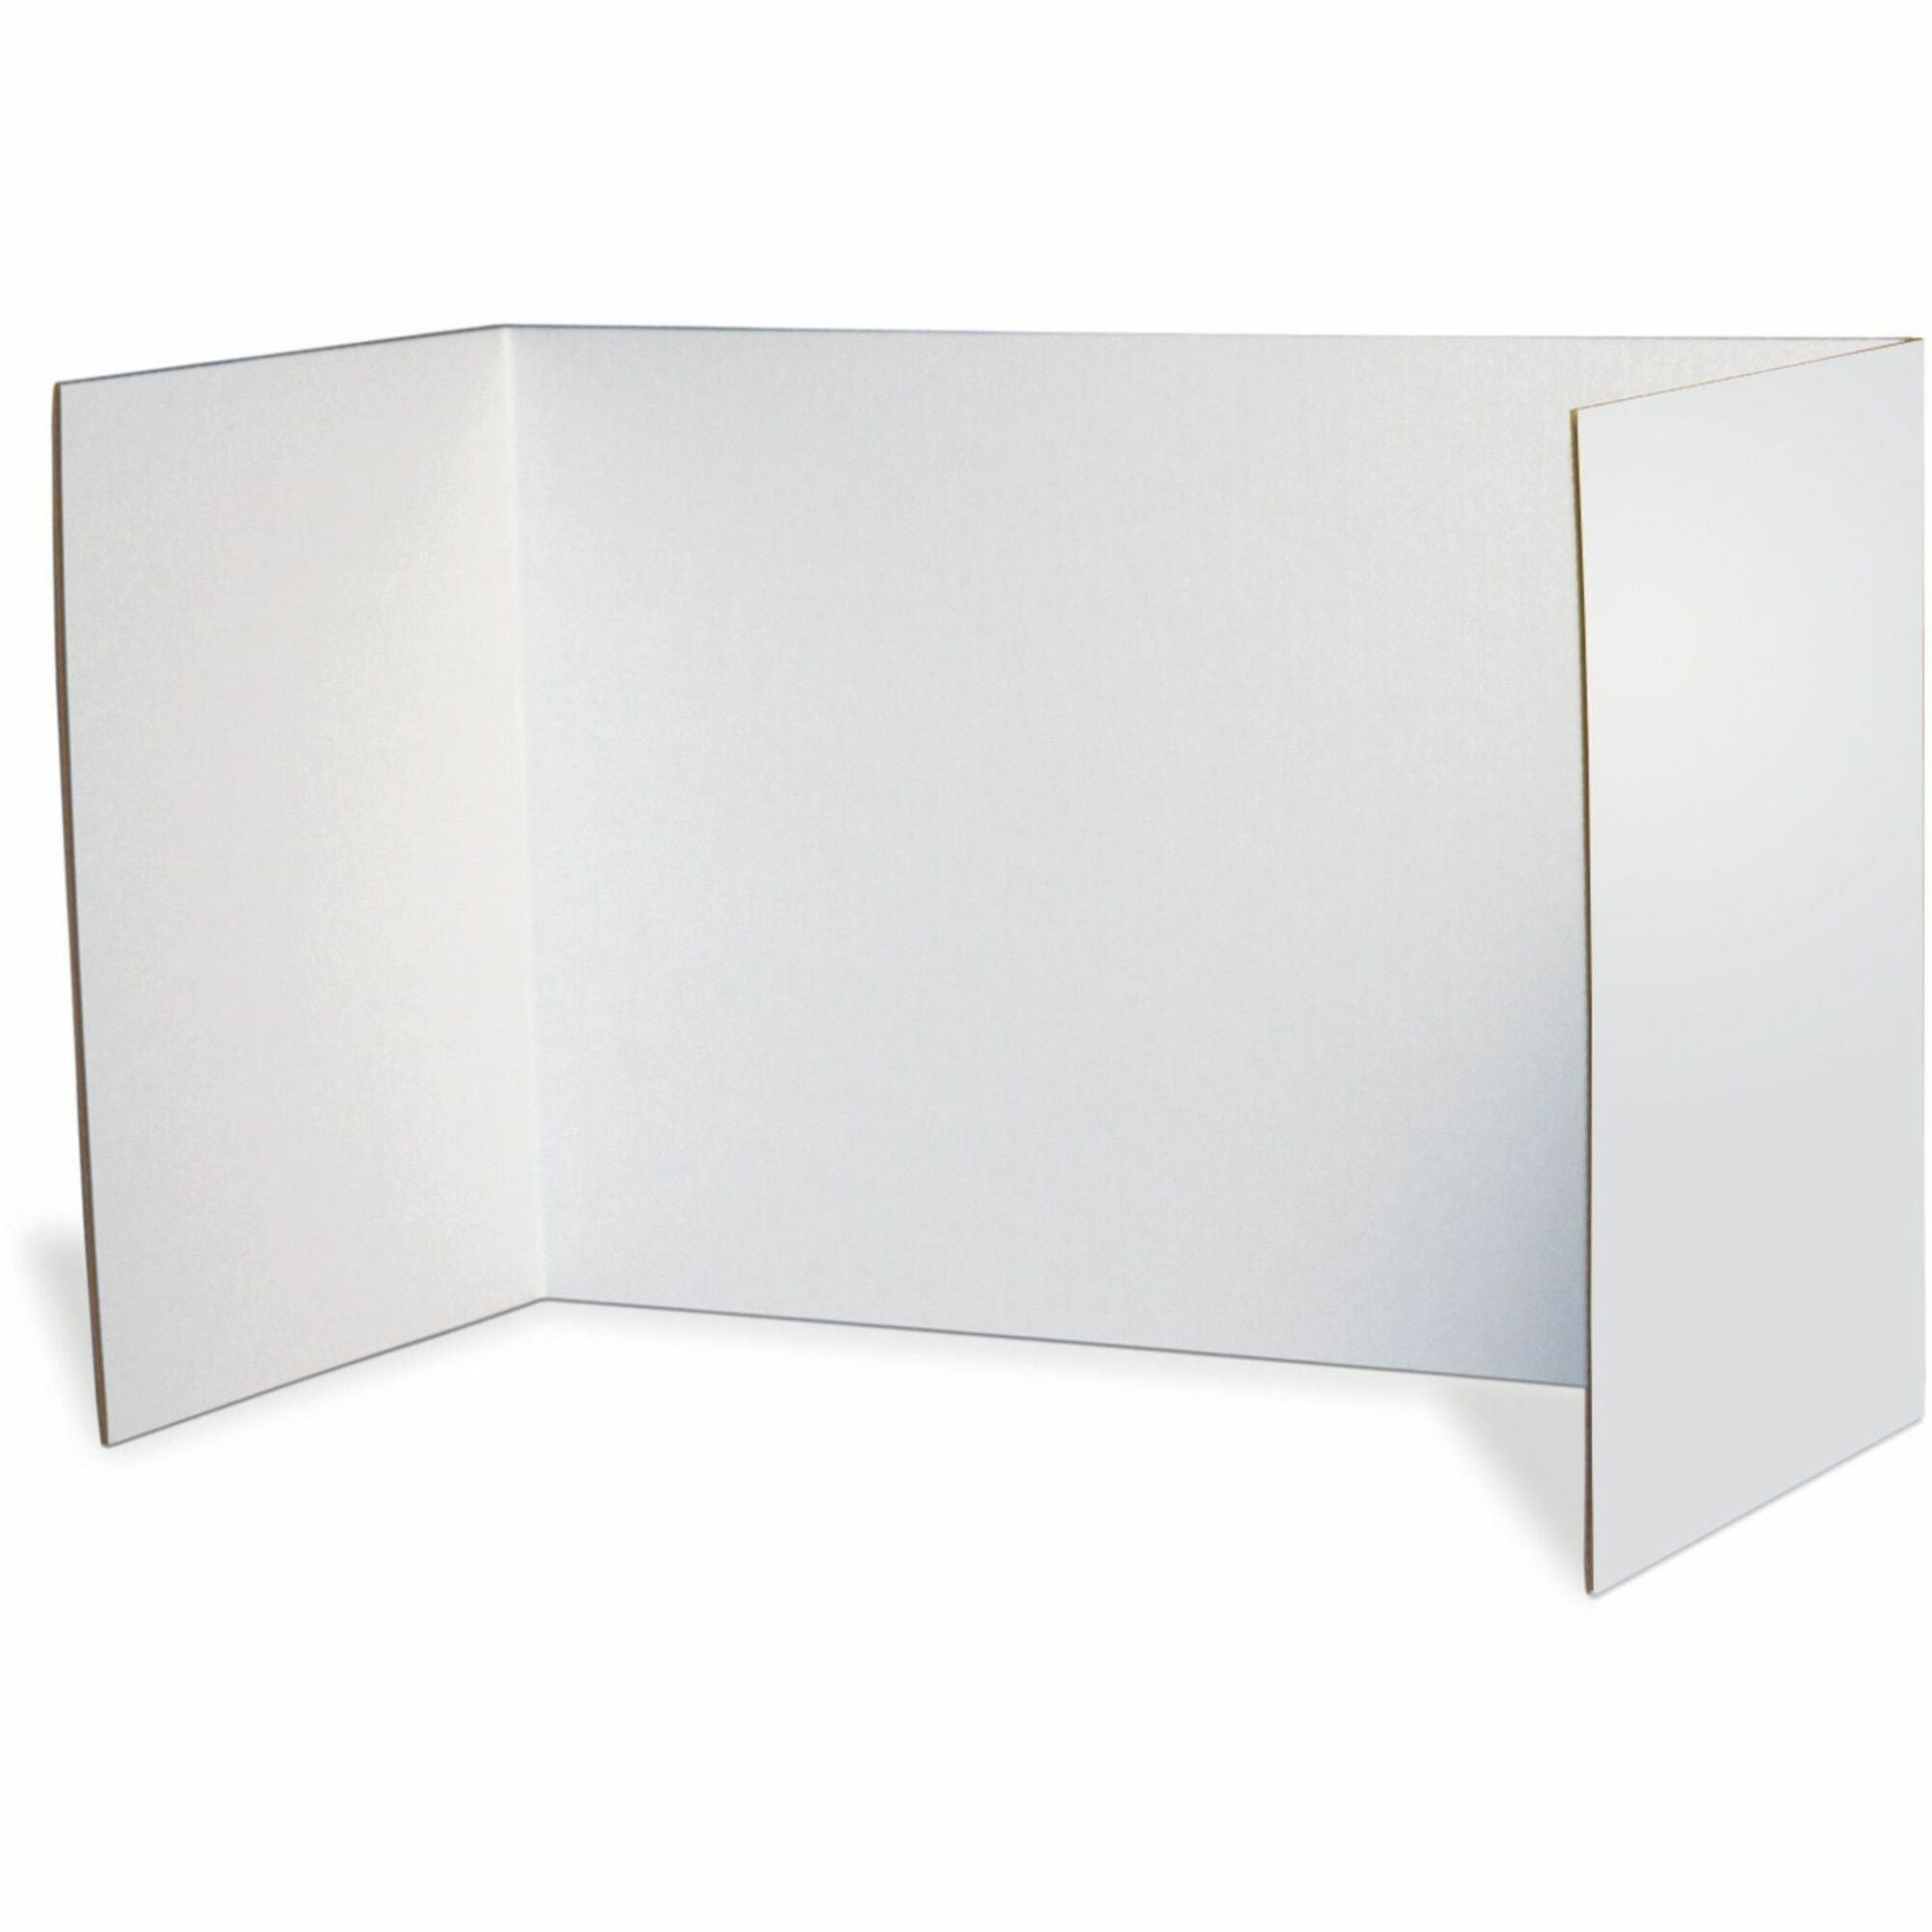 Pacon Privacy Boards - 48"W x 16"H - 4 Boards/Pack - White - 